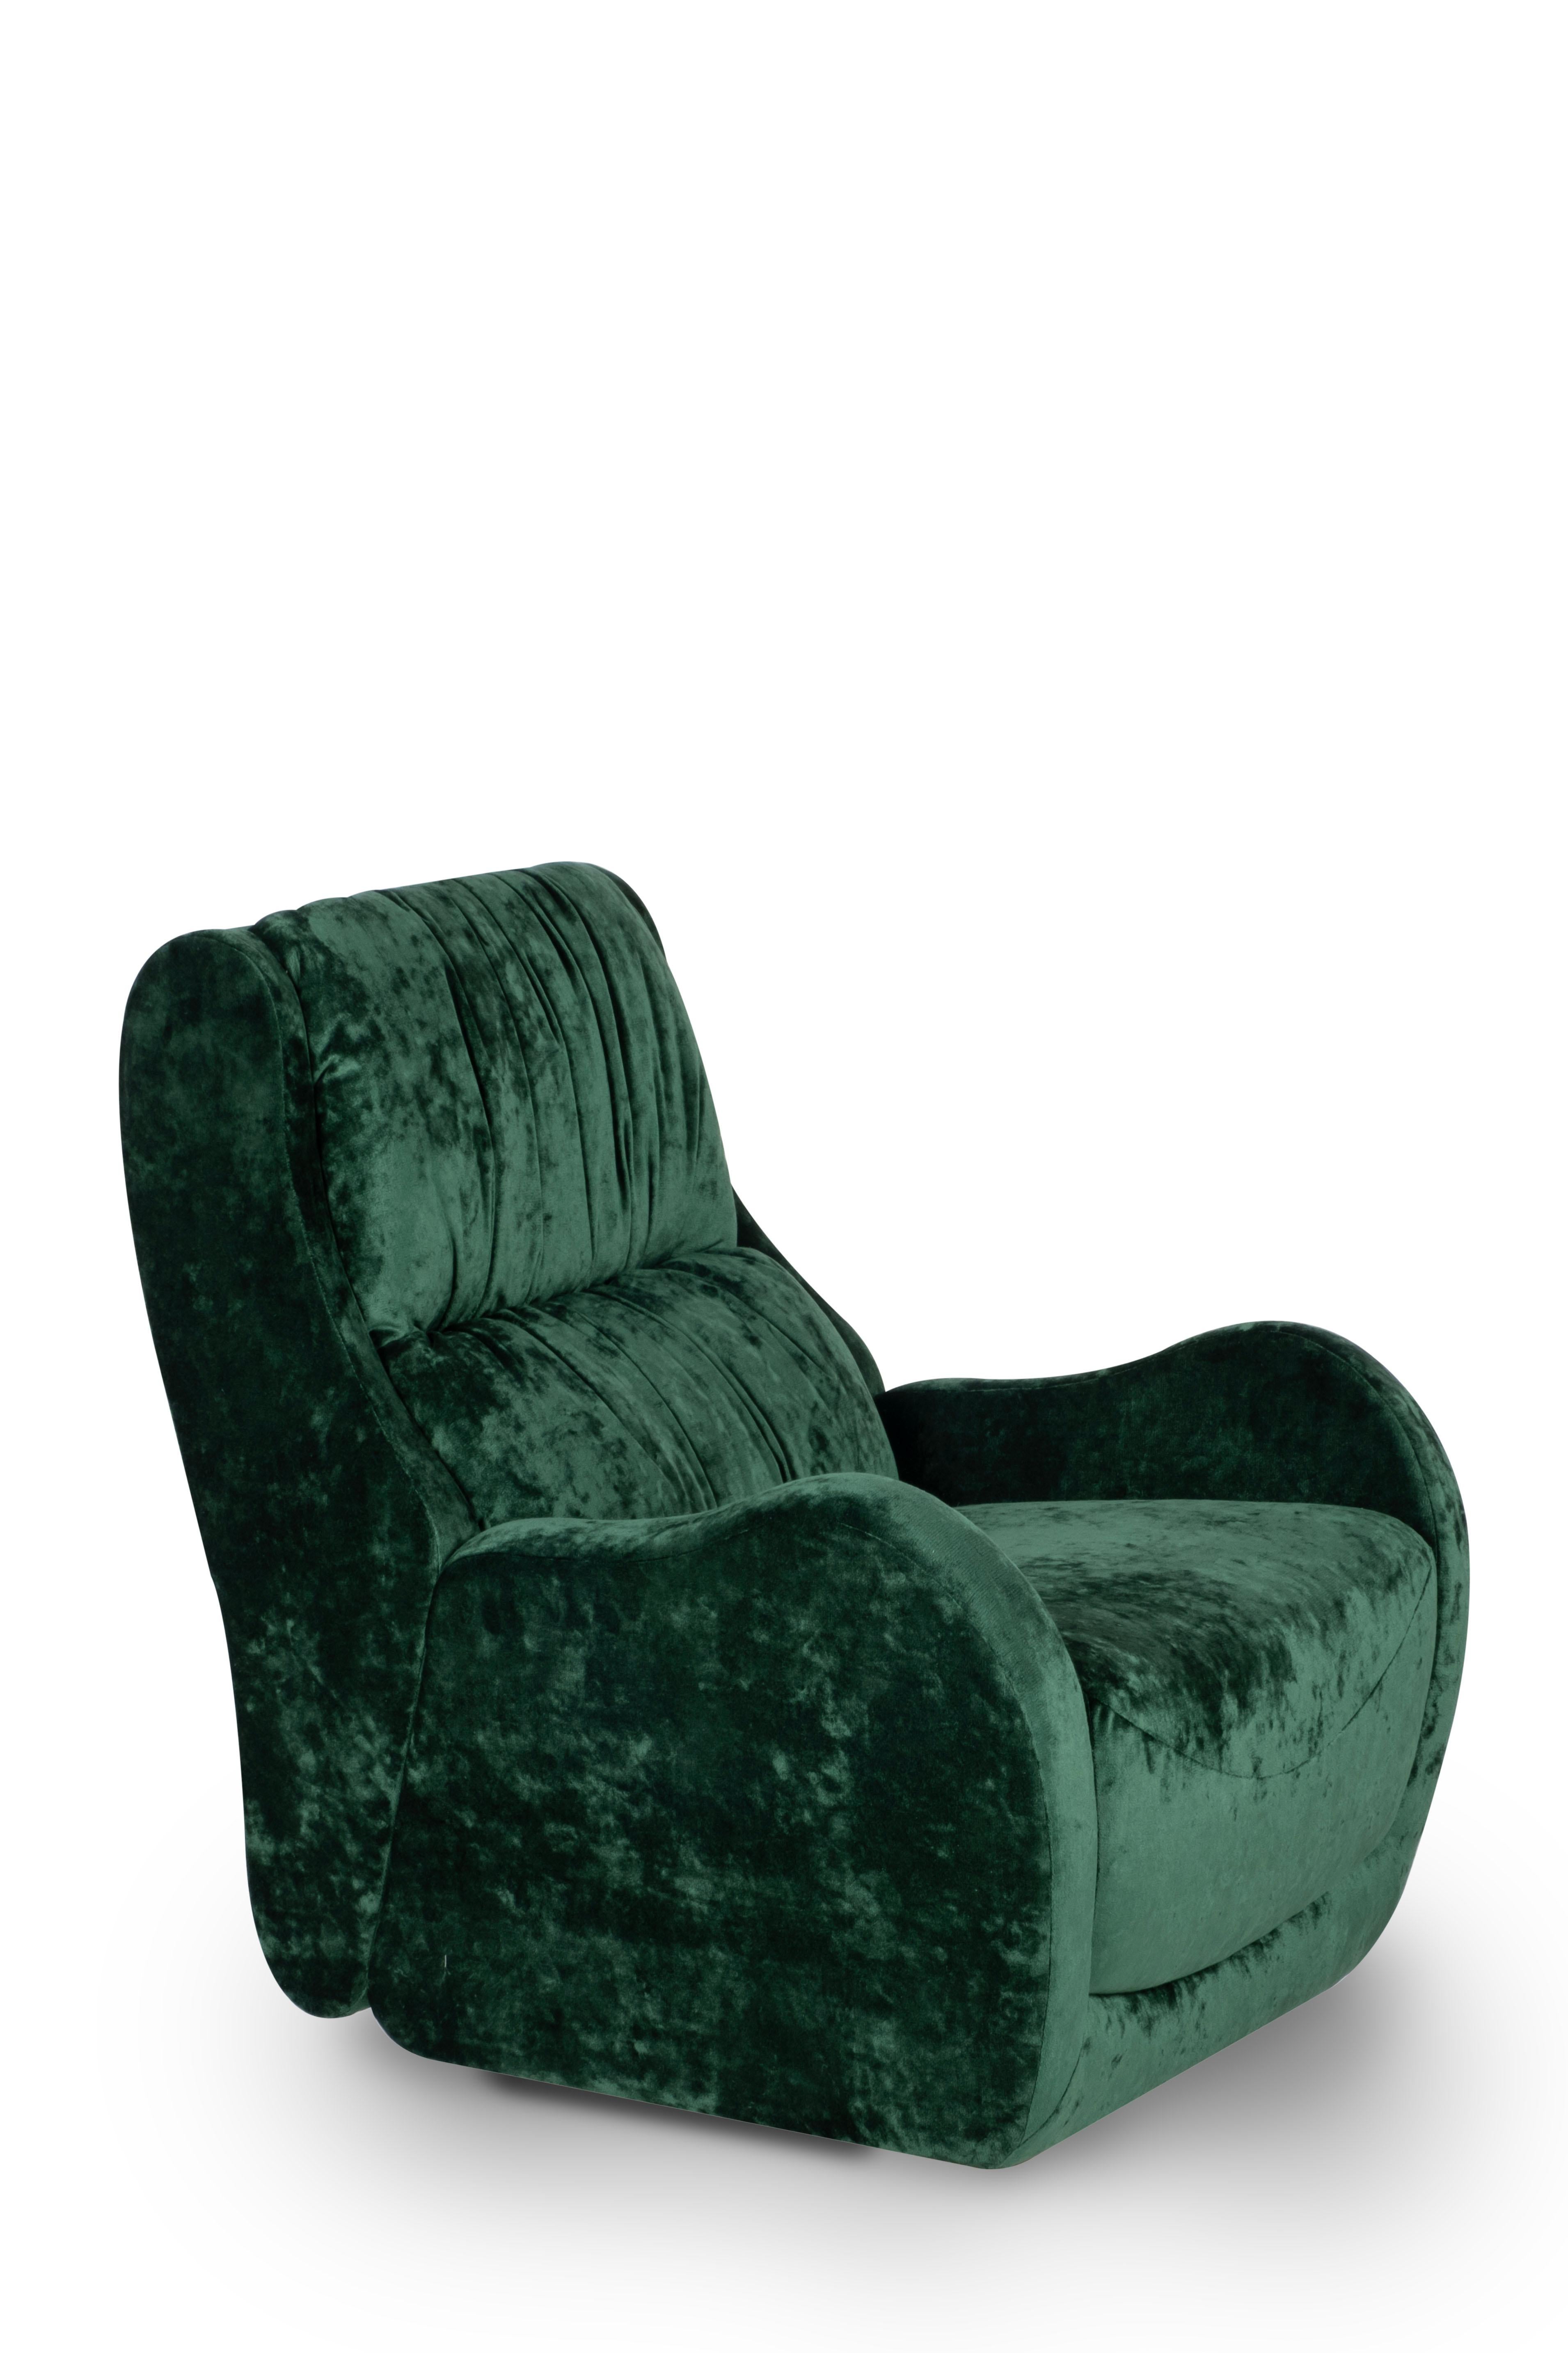 Capelinhos Swivel Lounge Chair, Contemporary Collection, Handcrafted in Portugal - Europe by Greenapple.

The Capelinhos modern lounge chair stands as a testament to timeless comfort. Much like a fine wine, Capelinhos ages gracefully with its velvet